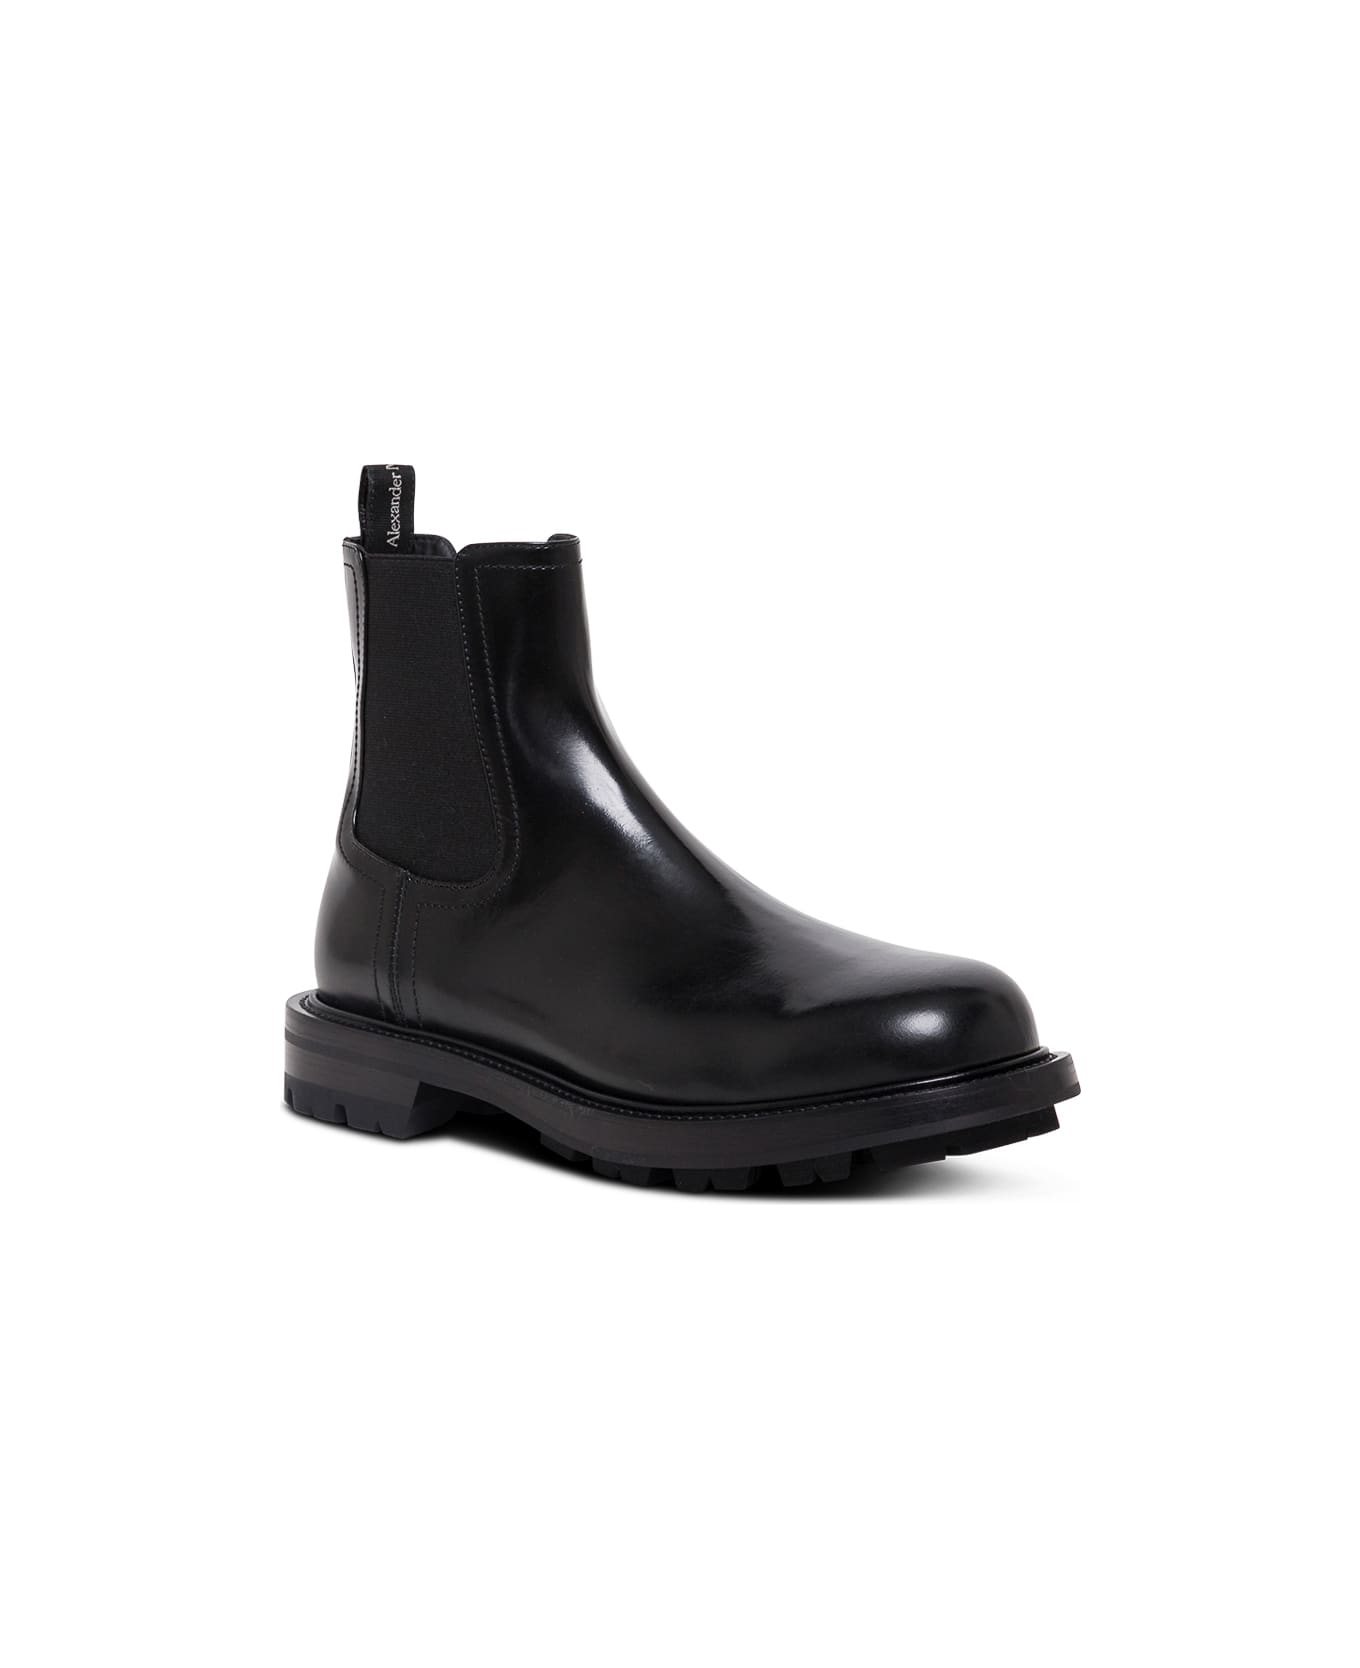 Alexander McQueen Man's Black Leather Ankle Boots - Black